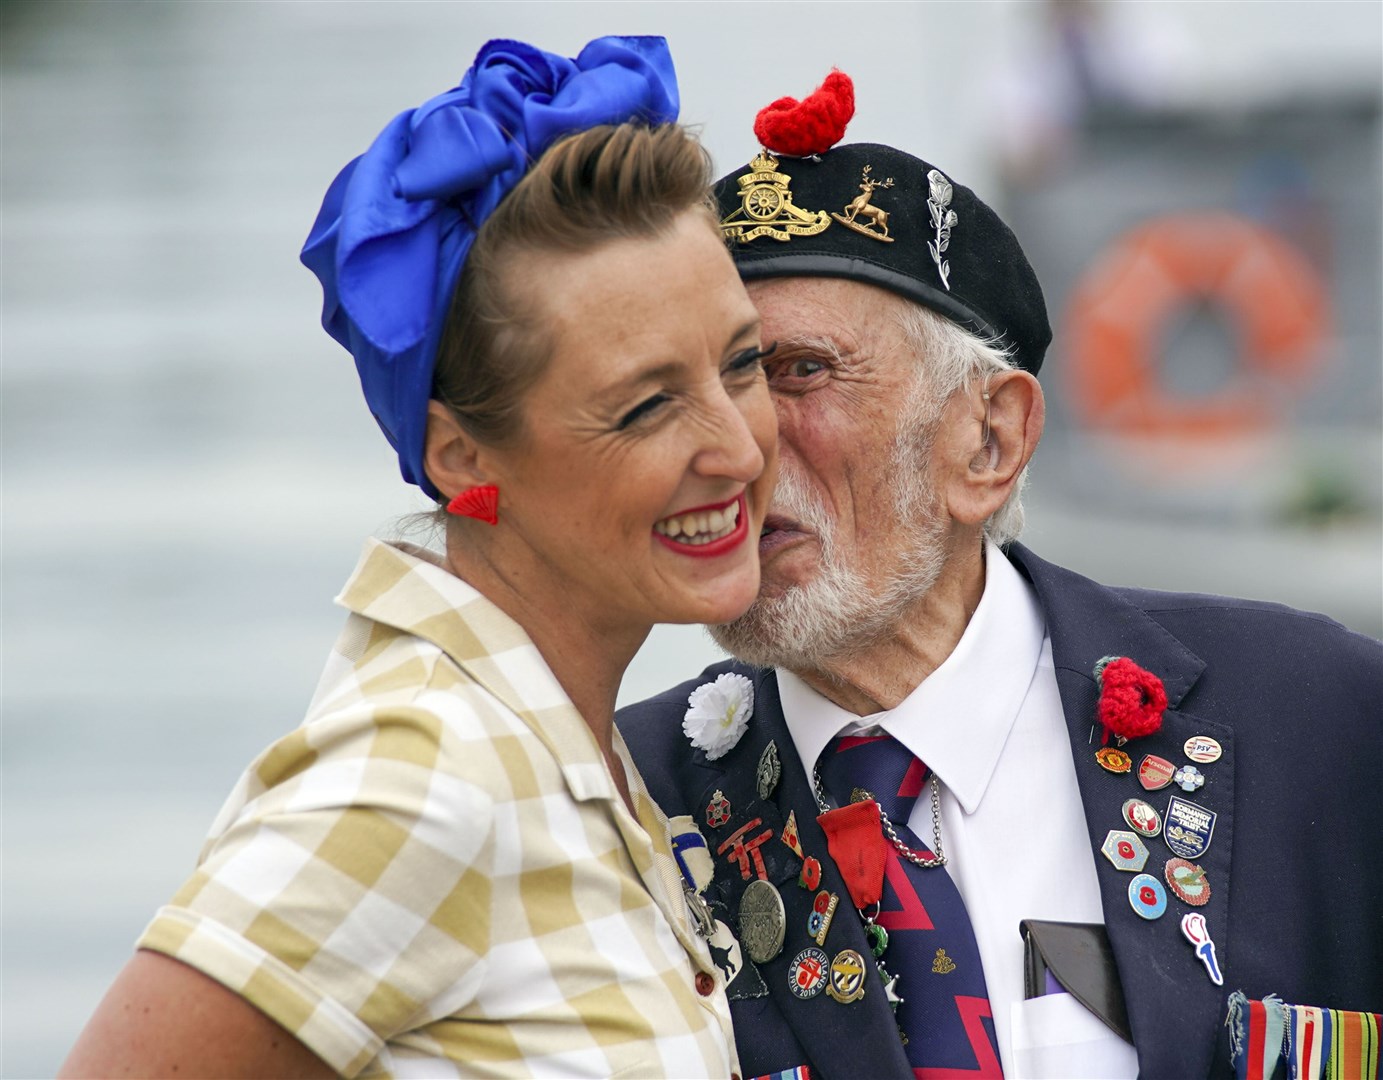 Joe Cattini kissing a member of the Charlalas on the day he and other veterans are welcomed to the Portsmouth Historic Dockyard to commemorate the 77th anniversary of the Normandy Landings (Steve Parsons/PA)